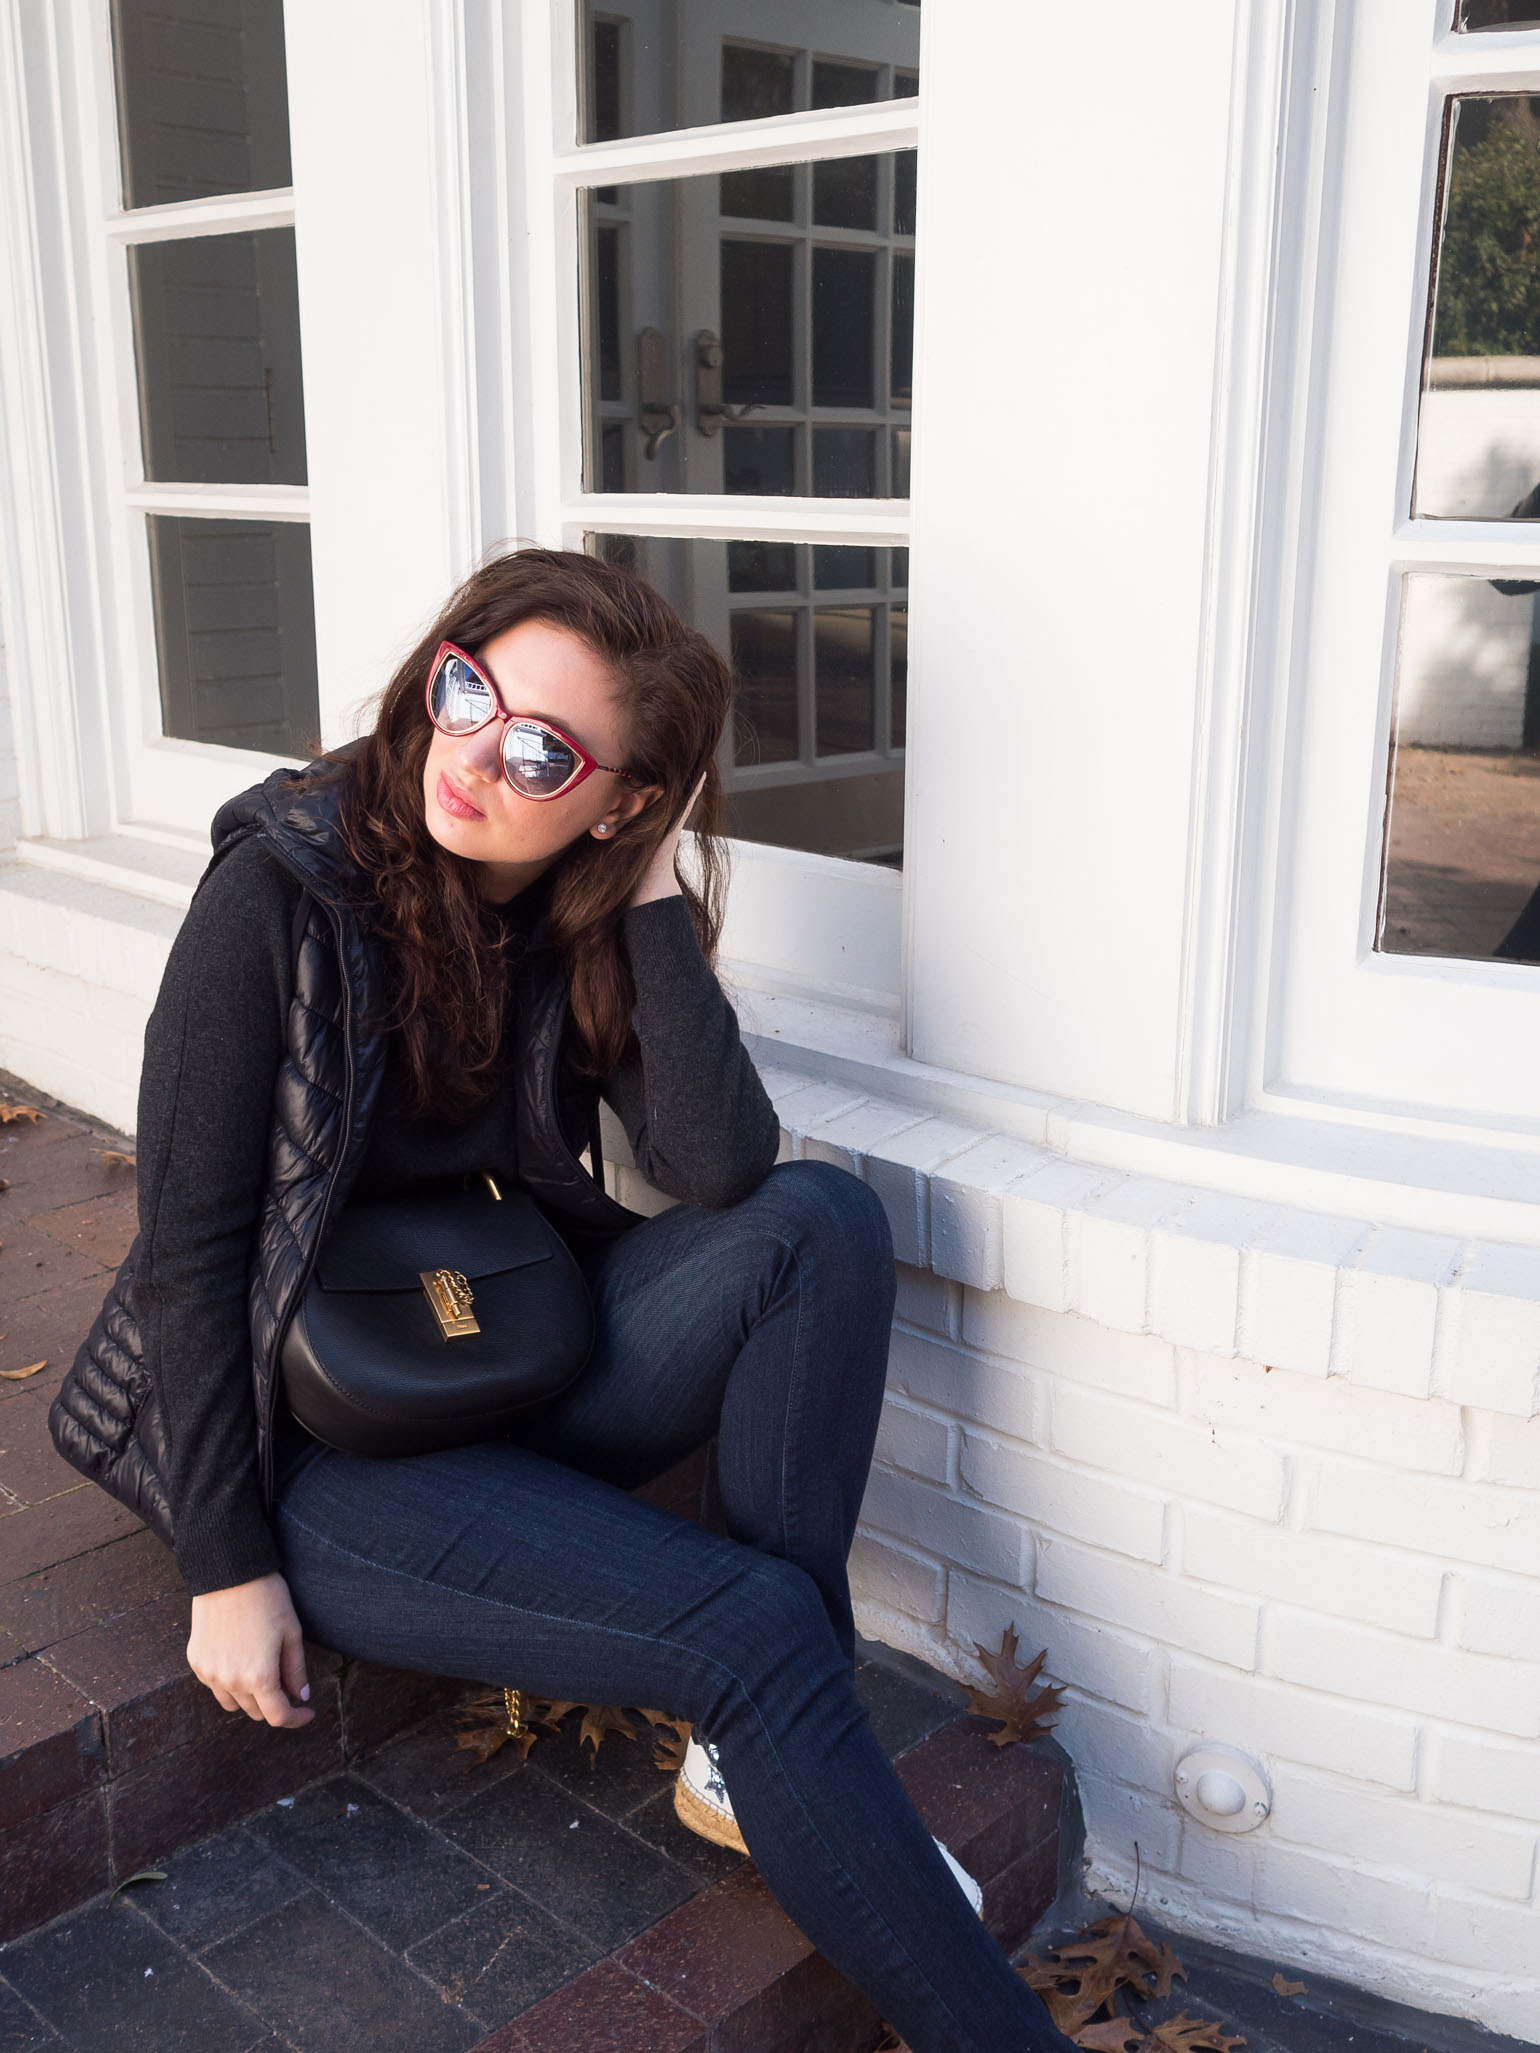 Dallas fashion bloggers hares her athleisure weekend style